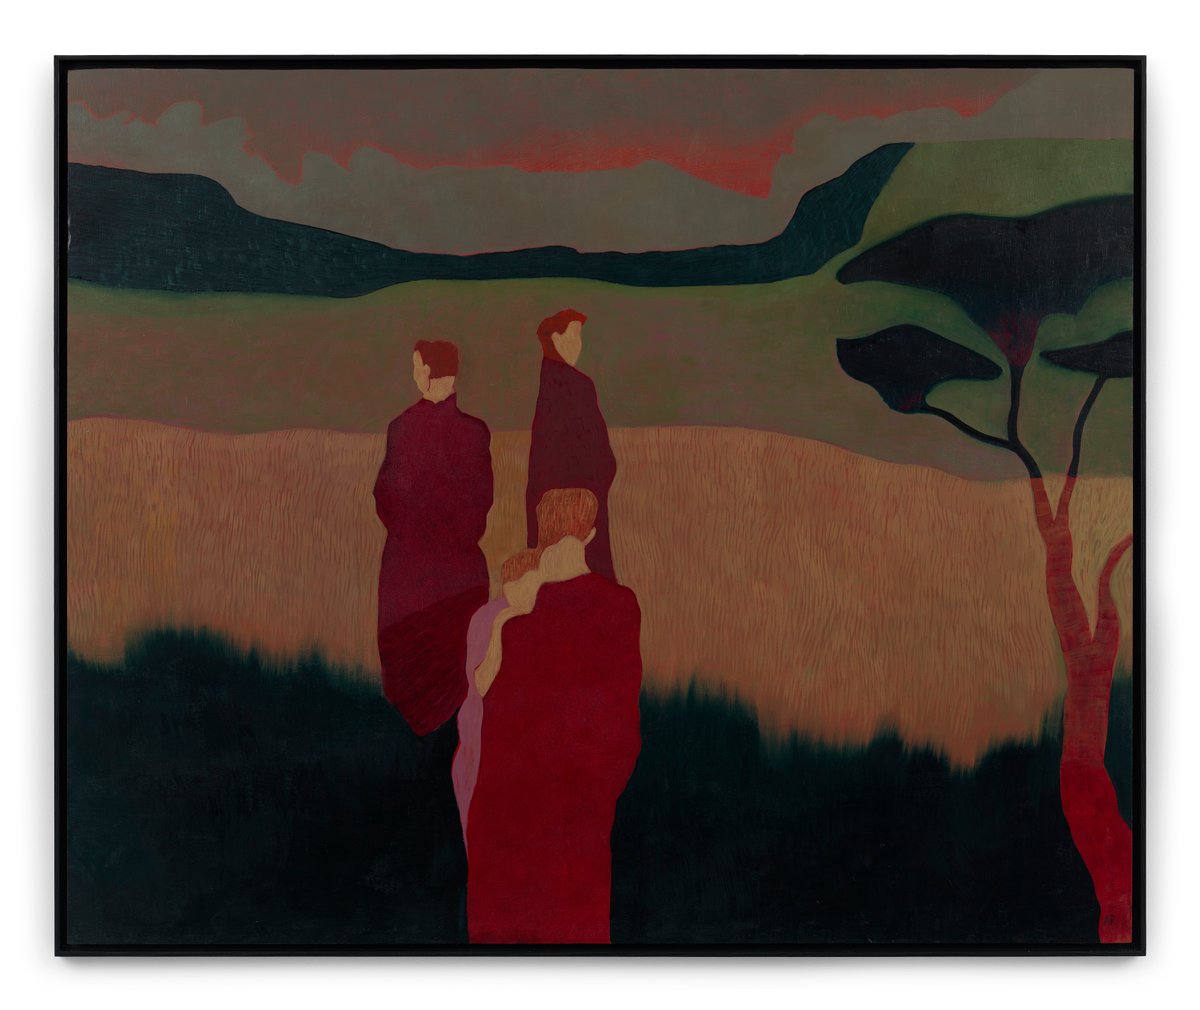 The Wick - Anne Rothenstein, 'Unknown Territory 2', 2022. Oil on wood panel, 122 x 150cm (48 x 59in). Framed: 126.7 x 154.3cm (49 7/8 x 60 3/4in). Copyright Anne Rothenstein. Courtesy the artist and Stephen Friedman Gallery, London. Photo by Todd-White Art Photography.